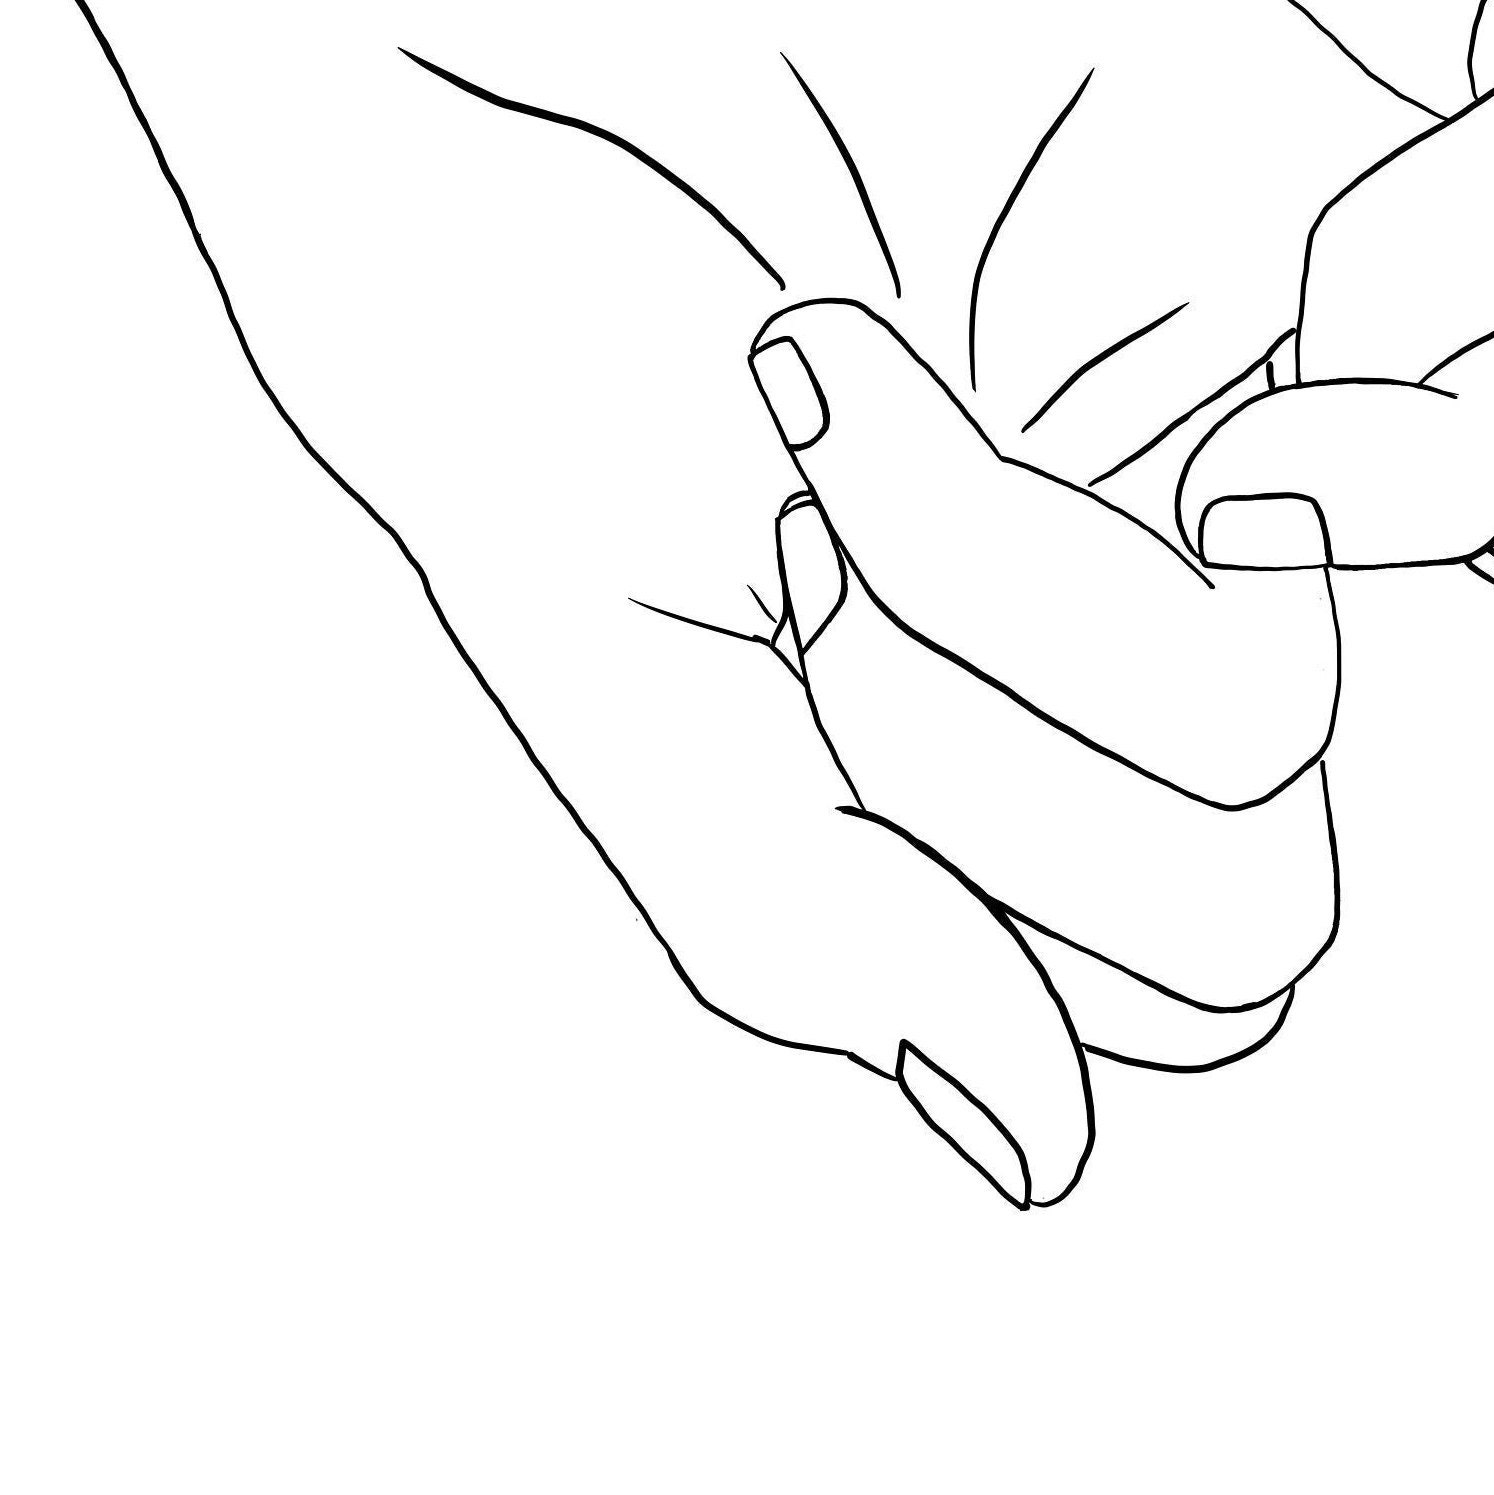 Animal Women Holding Pinkies Hands Drawing Sketch for Adult